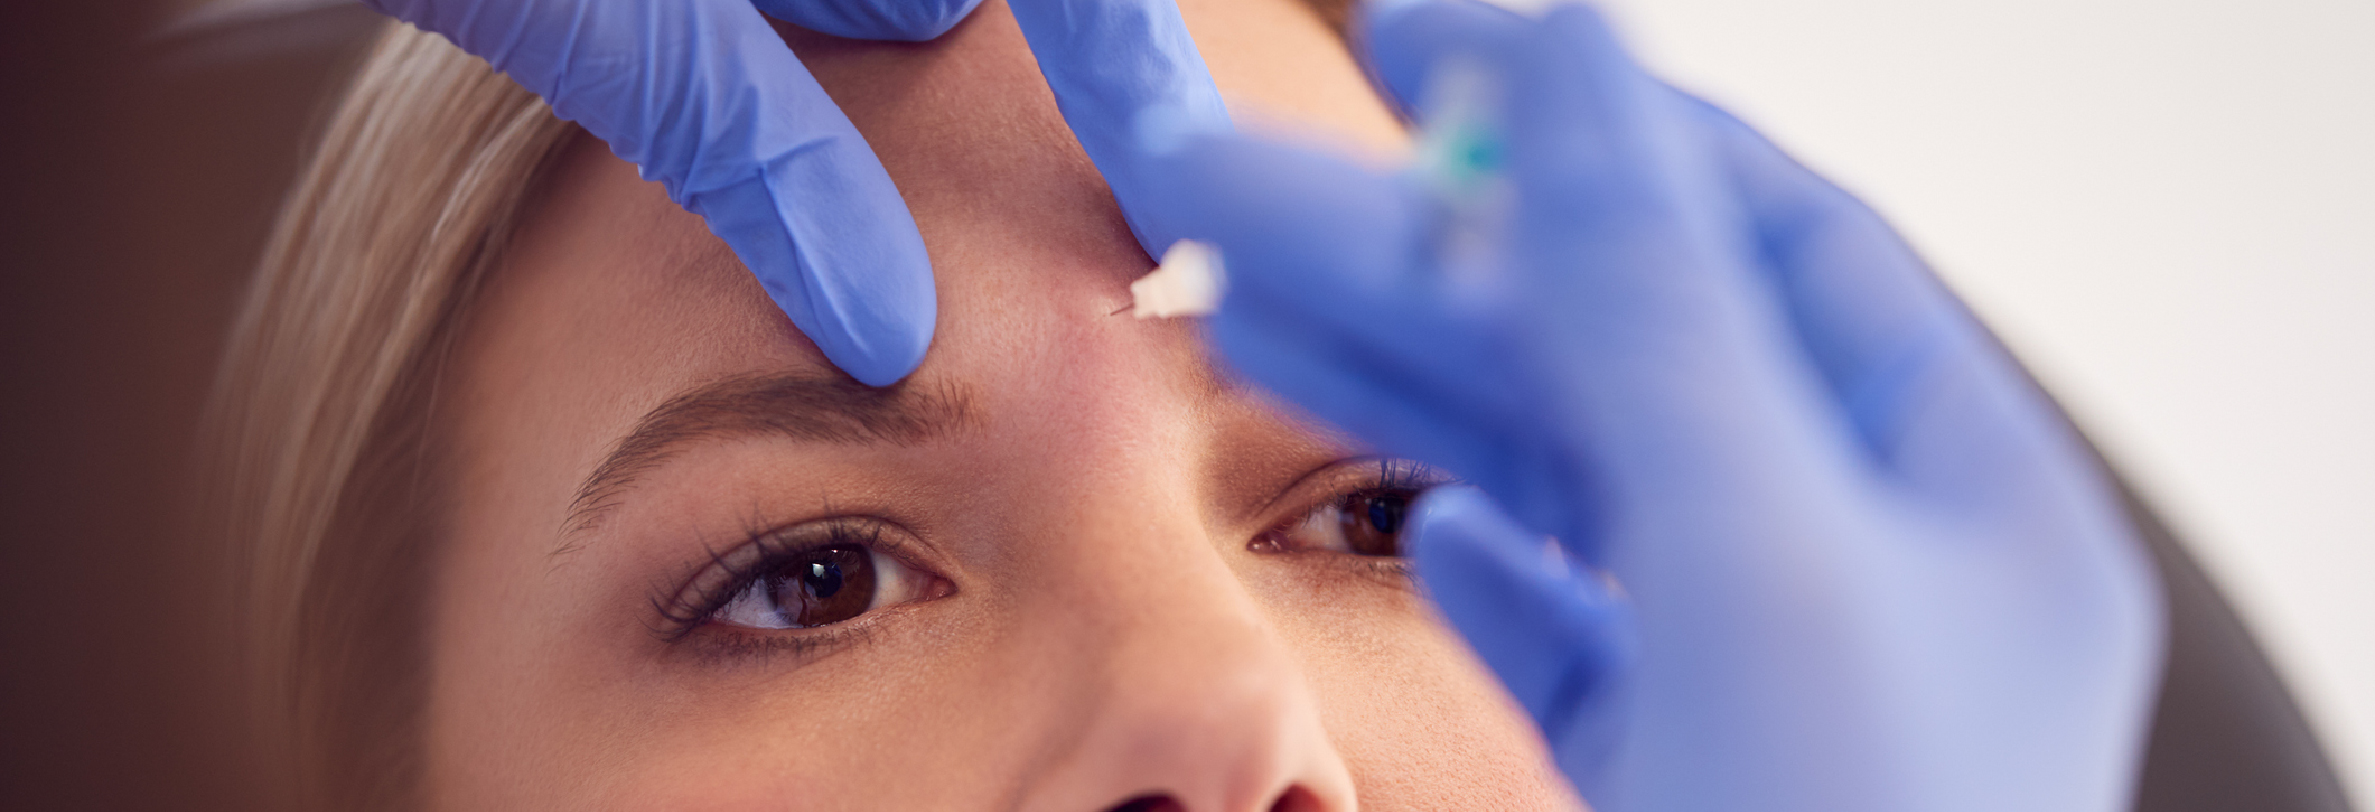 The Difference Between On-Label & Off-Label Botox Injections (Why We Offer Both)